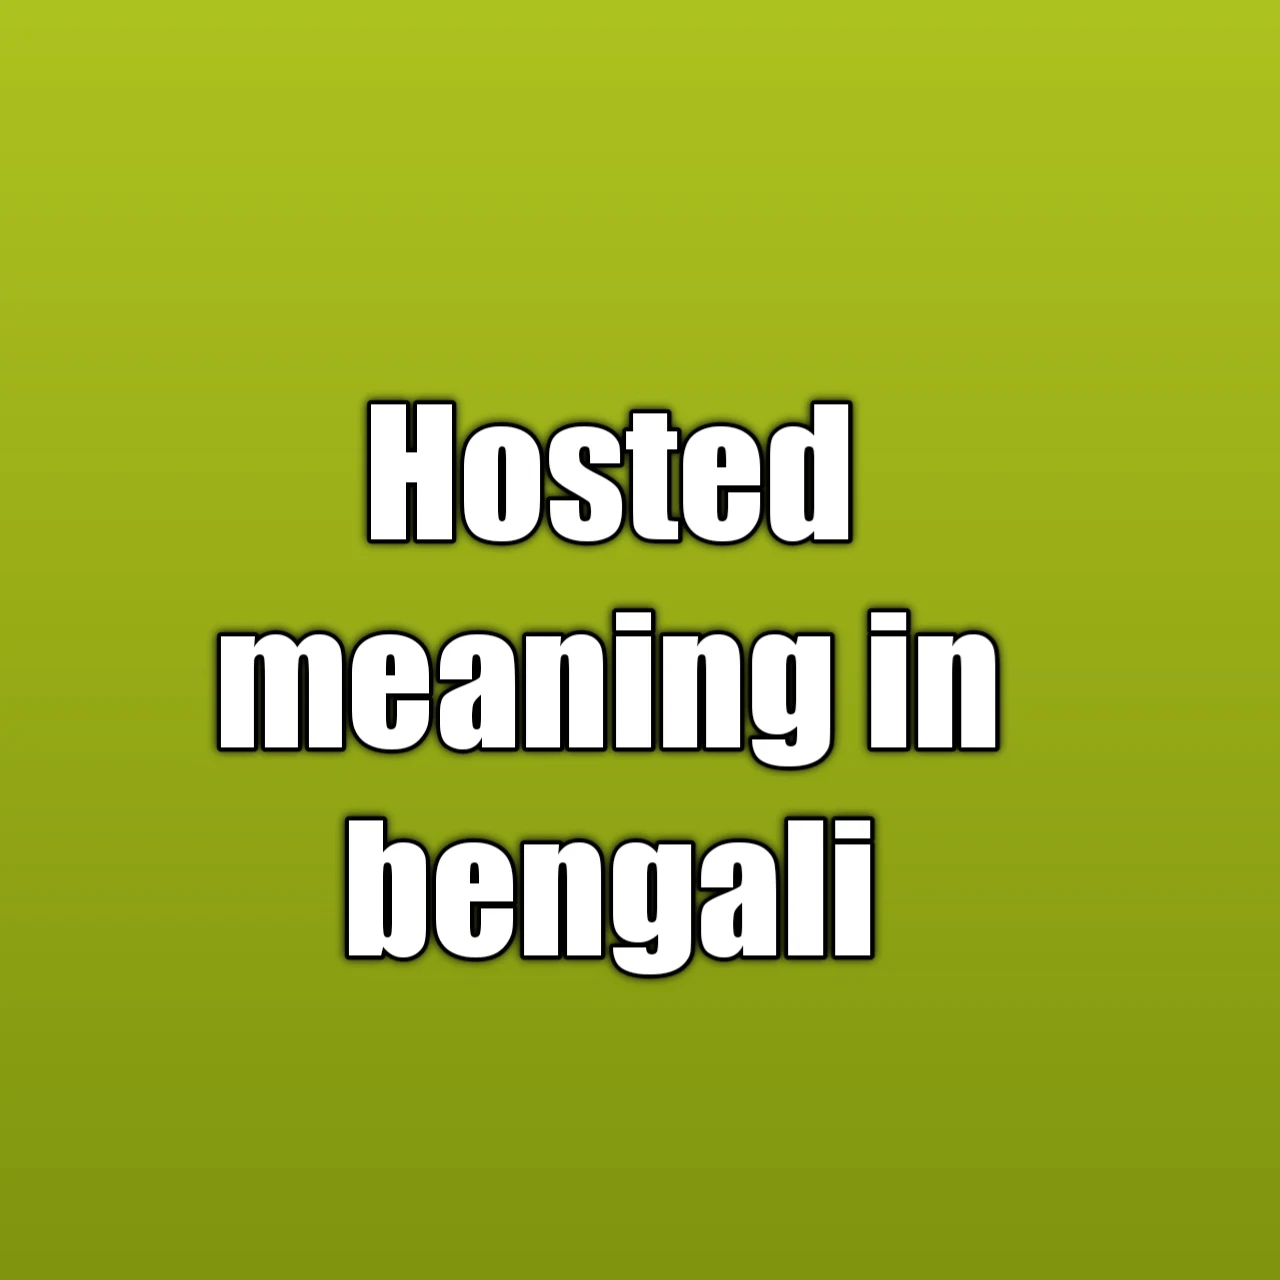 hosted meaning in bengali, hosted meaning